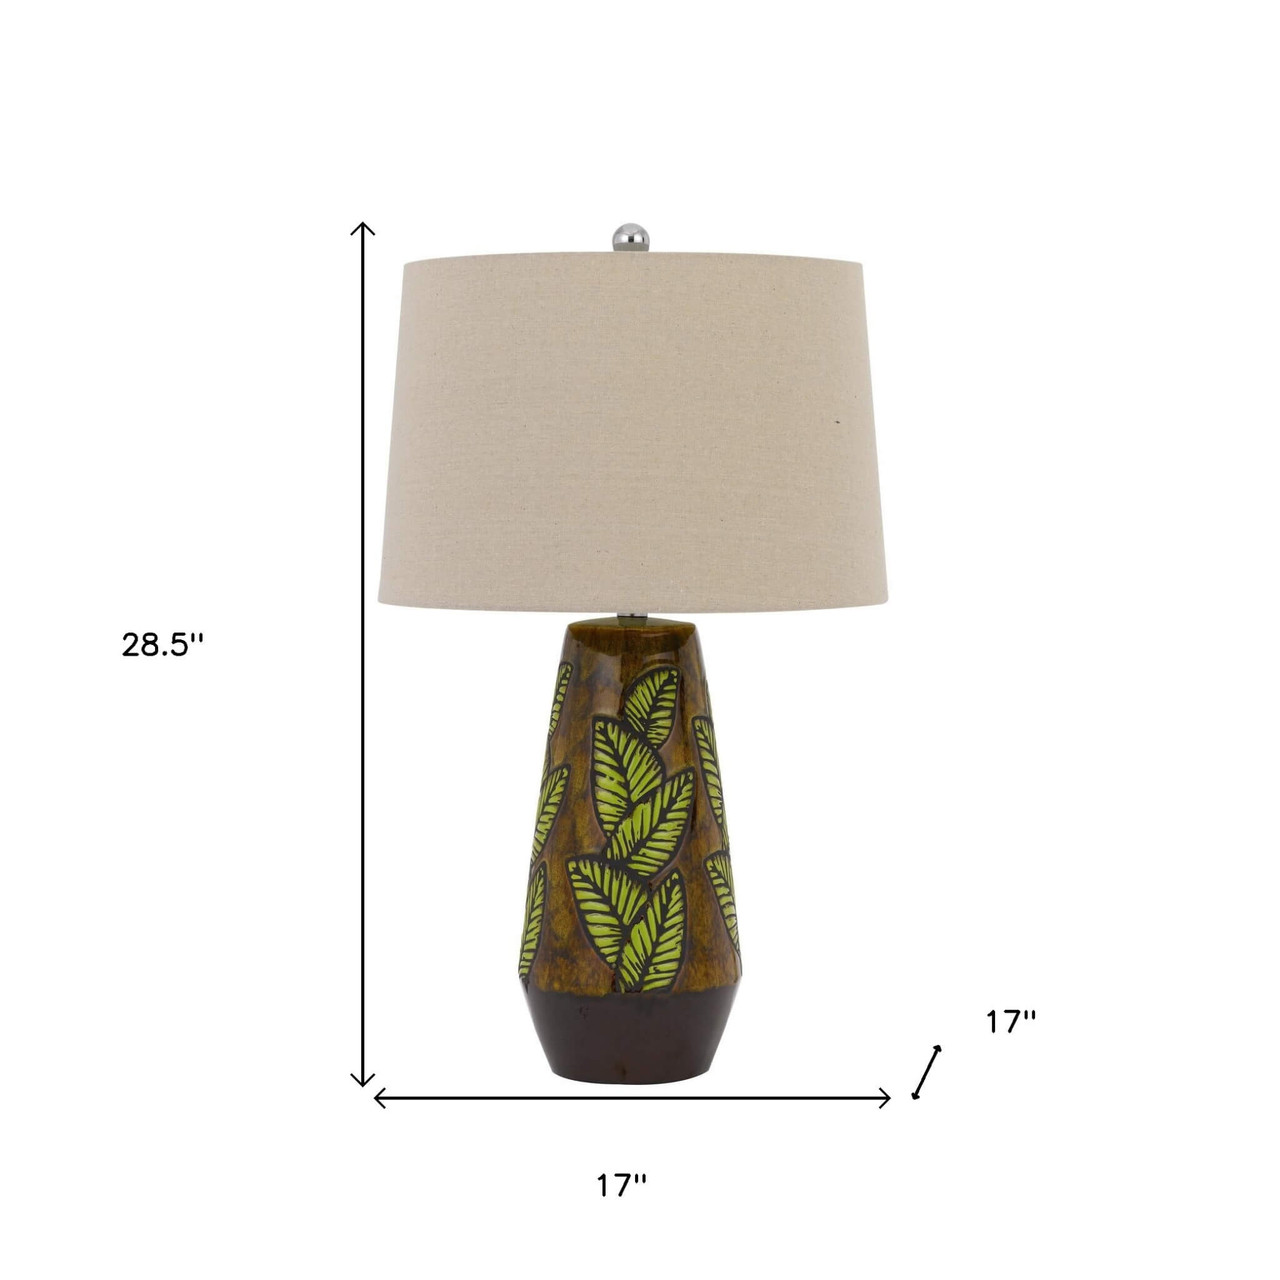 29" Brown Ceramic Table Lamp With Tan Empire Shade - Chicken Pieces